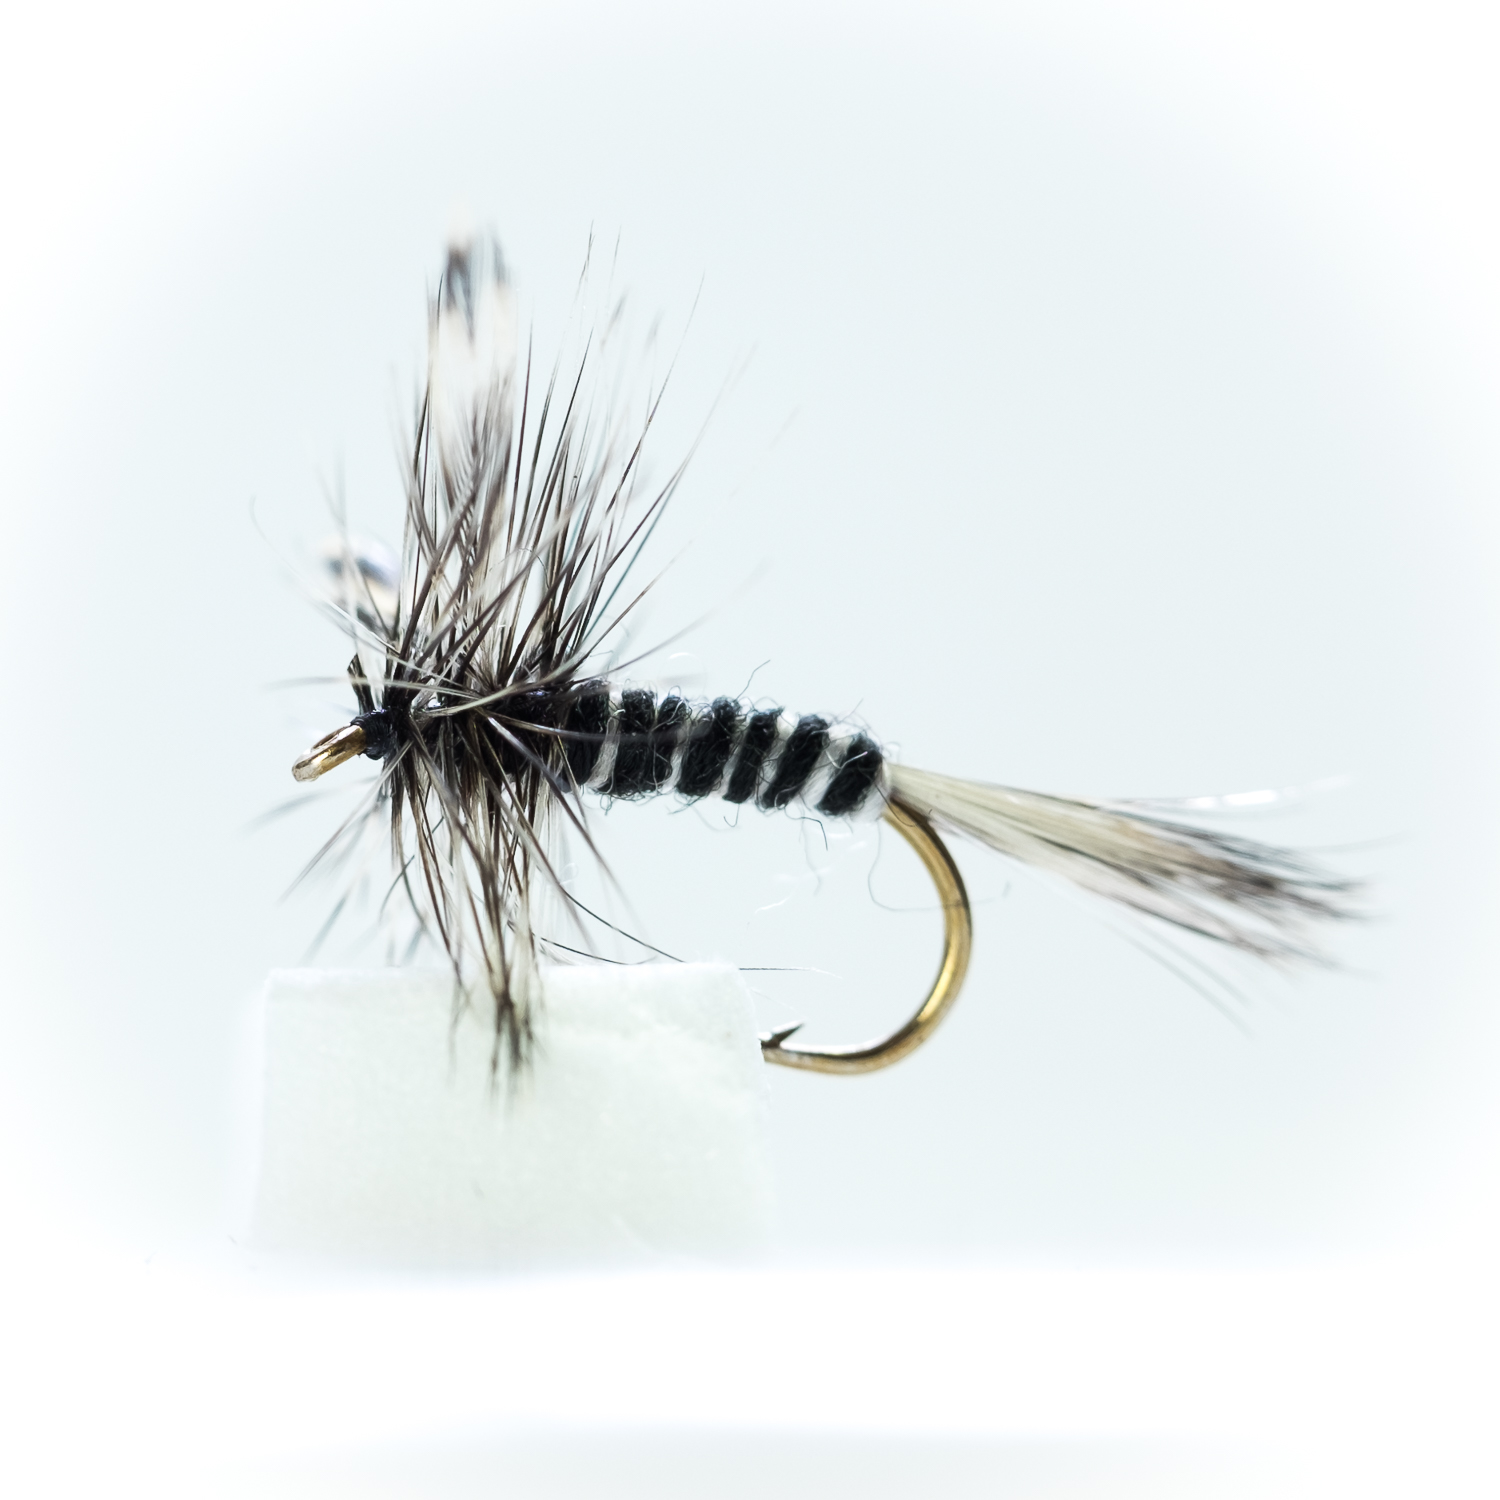 Mosquito Dry Fly - Dragonflies